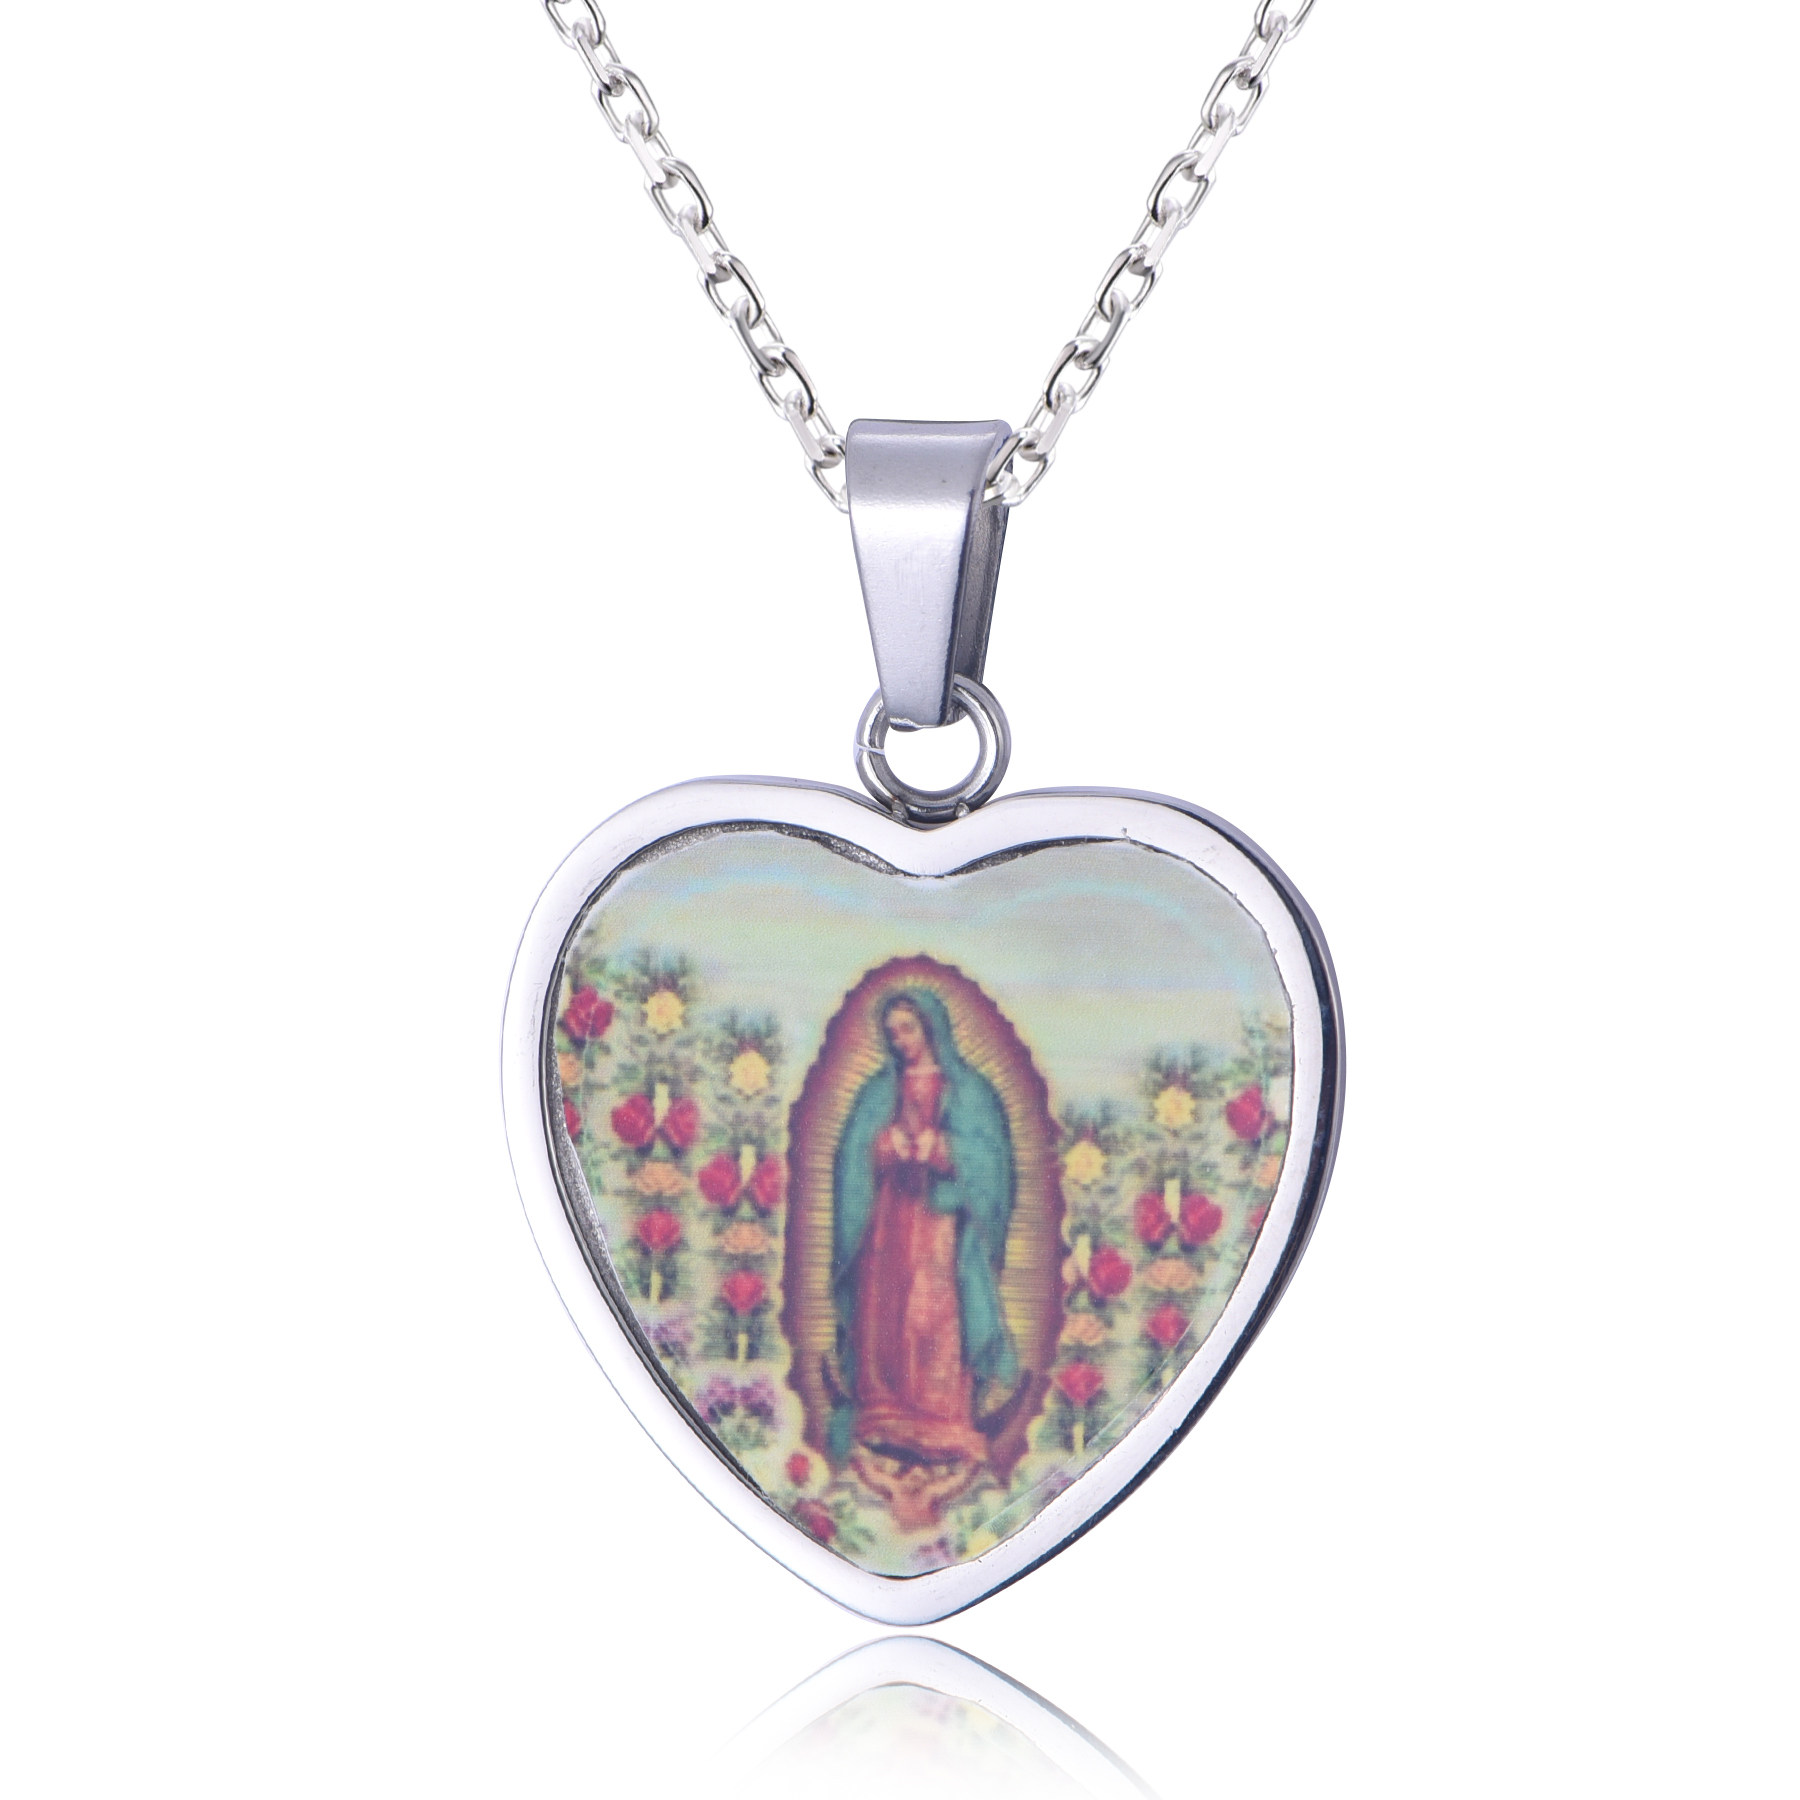 Stainless Steel Virgin Mary Religious Pendant Necklace NJ-06